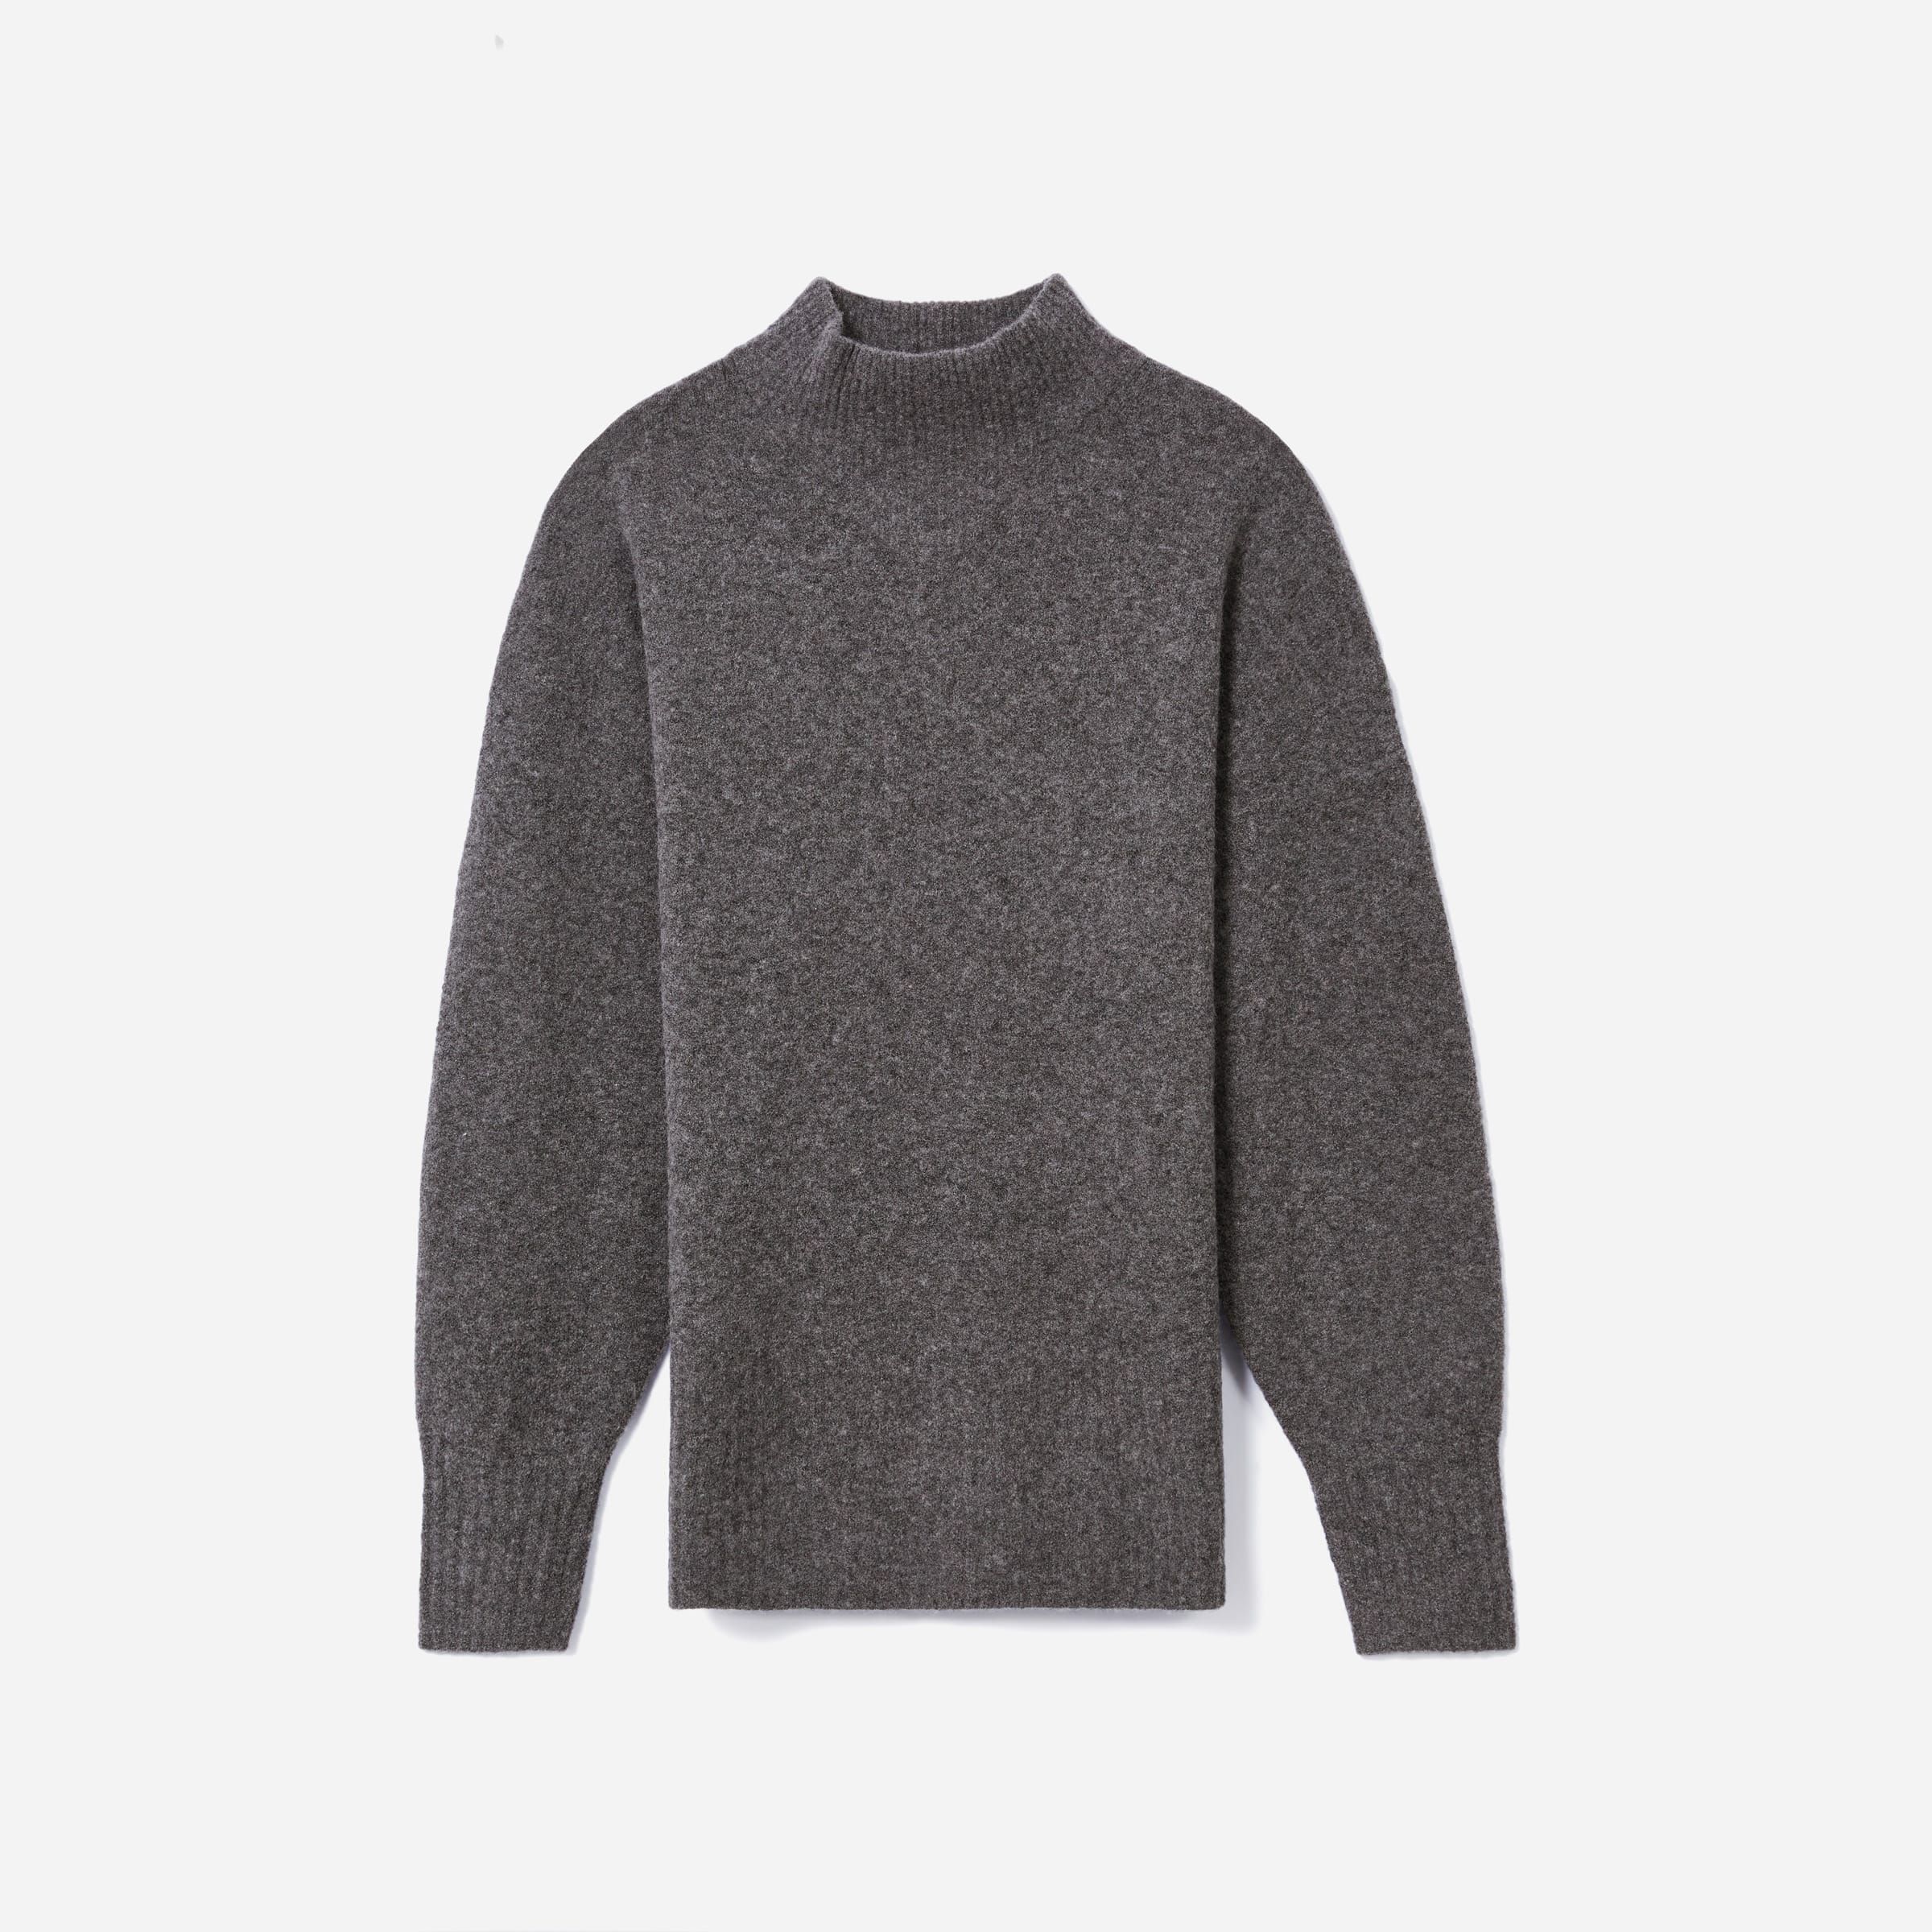 The Cozy-Stretch Pullover | Everlane